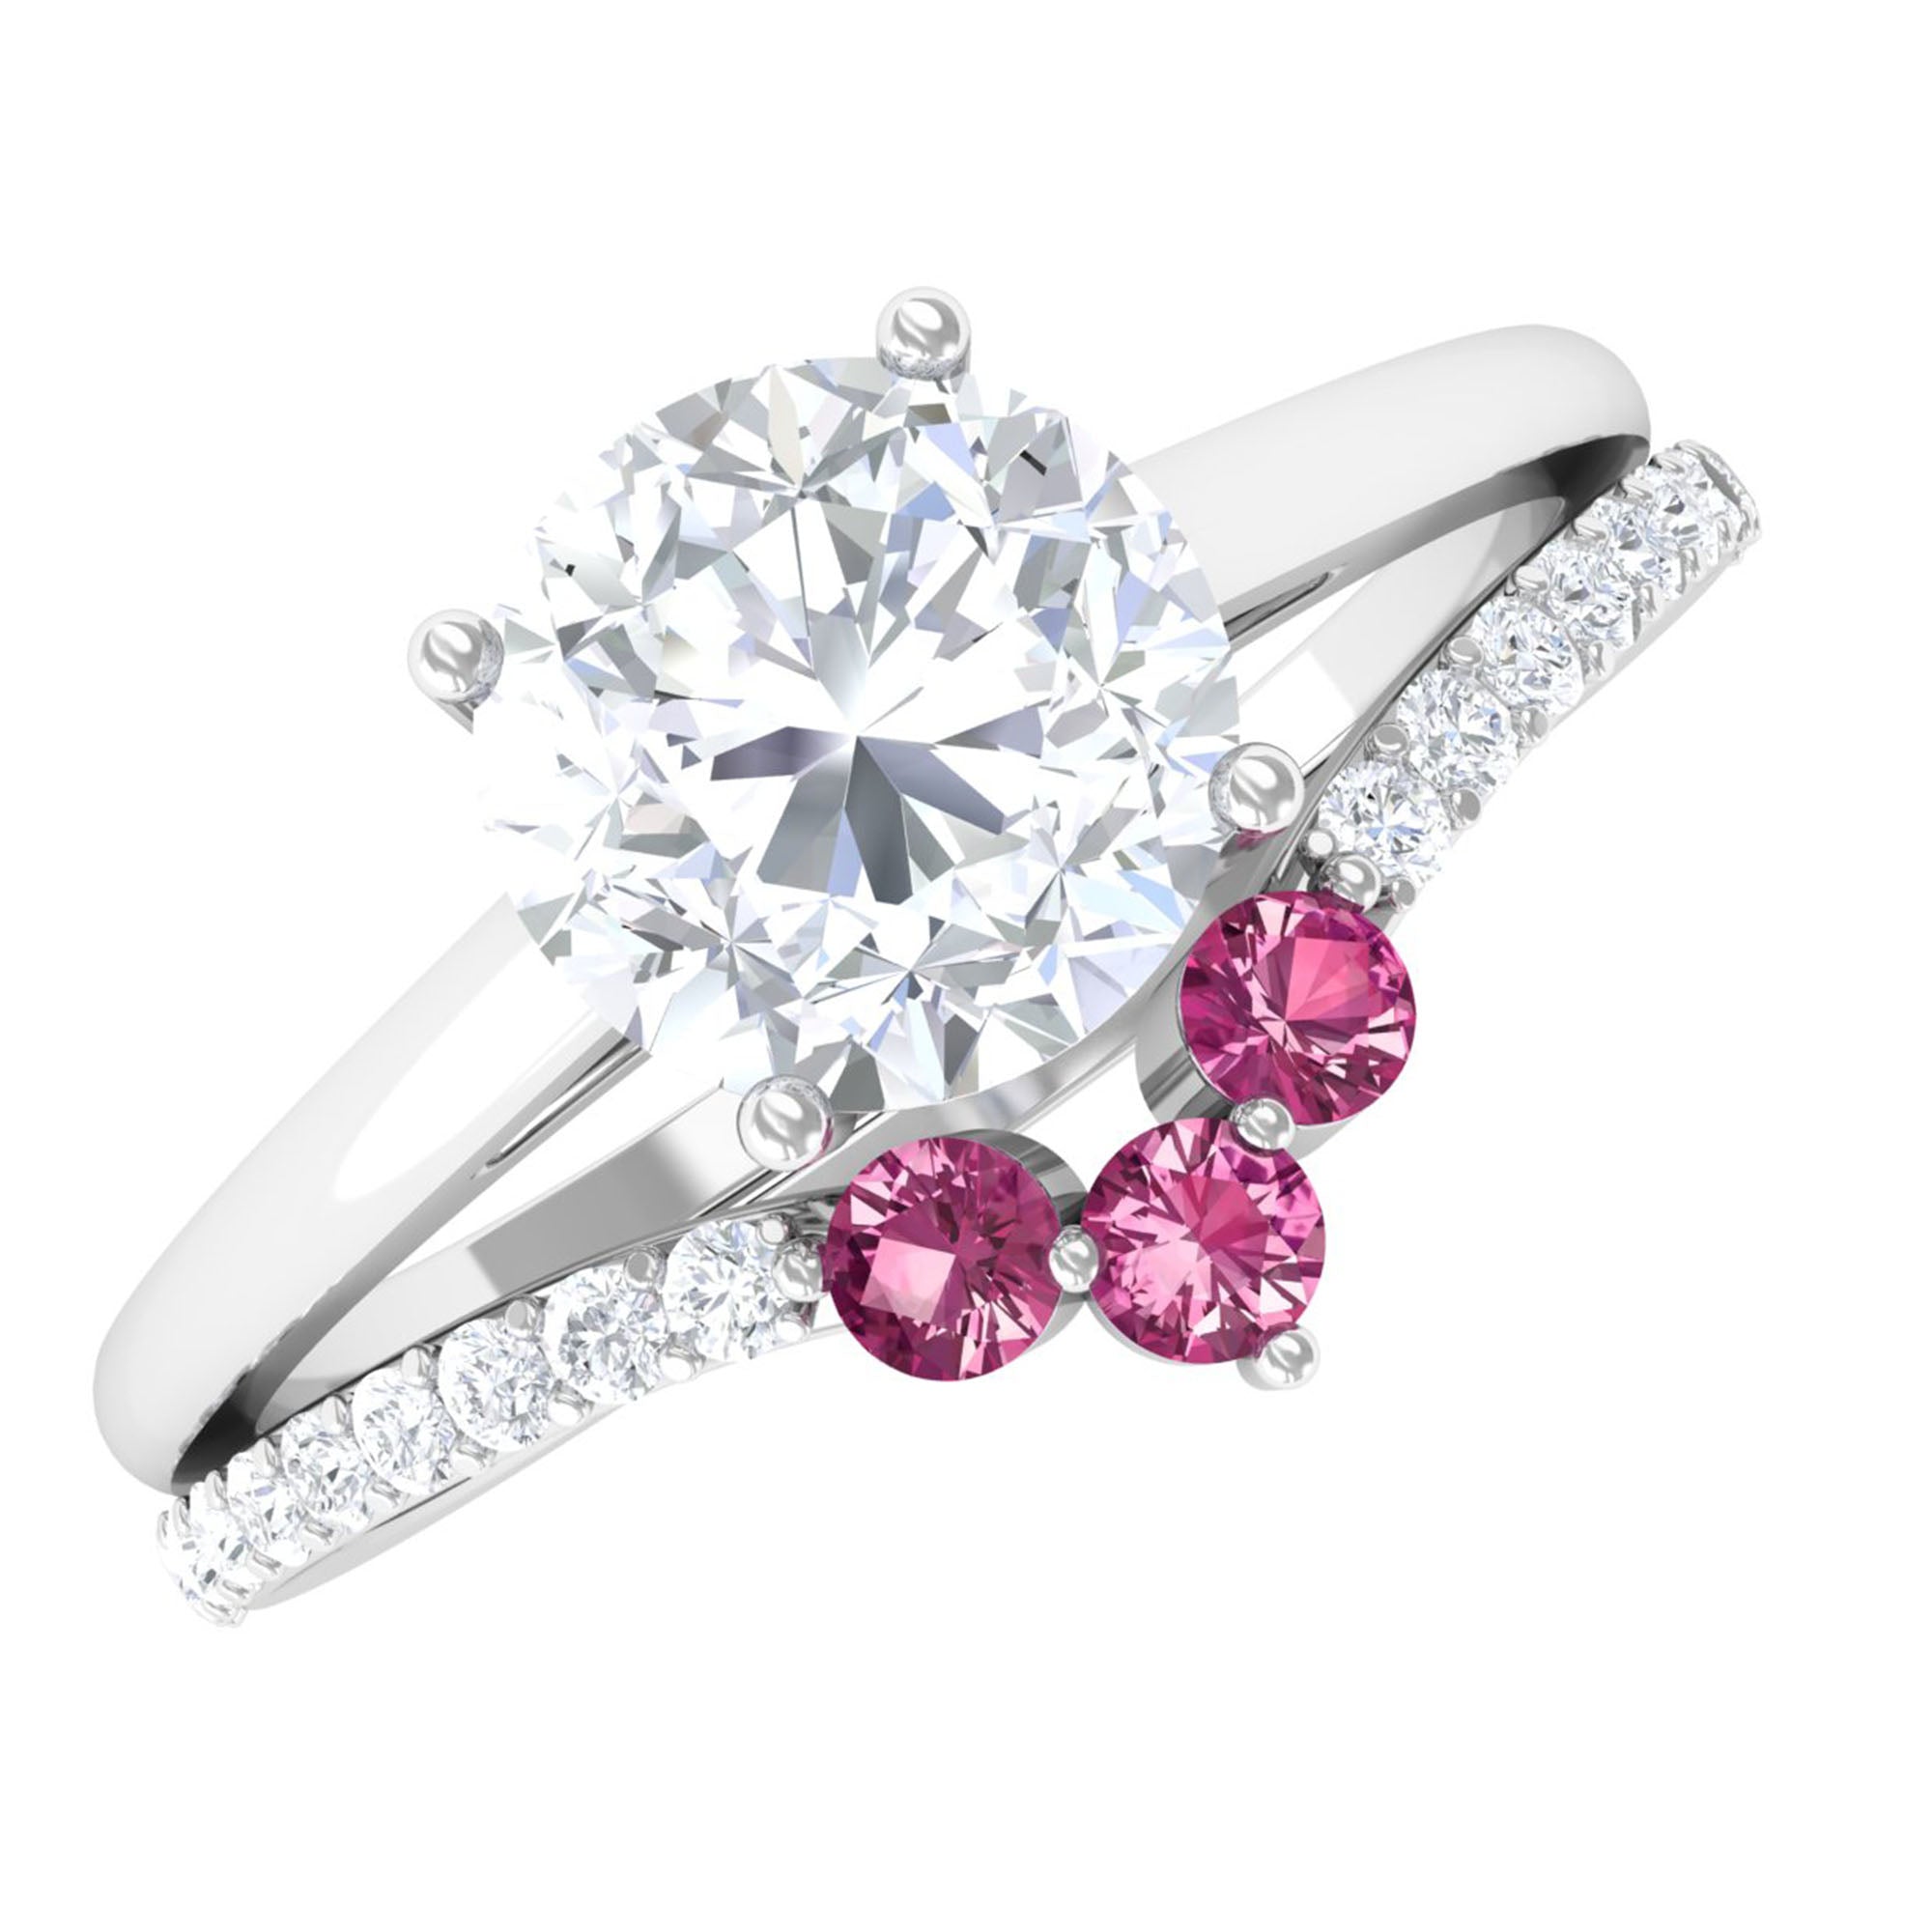 Moissanite Wedding Ring Set with Pink Tourmaline D-VS1 6 MM - Sparkanite Jewels